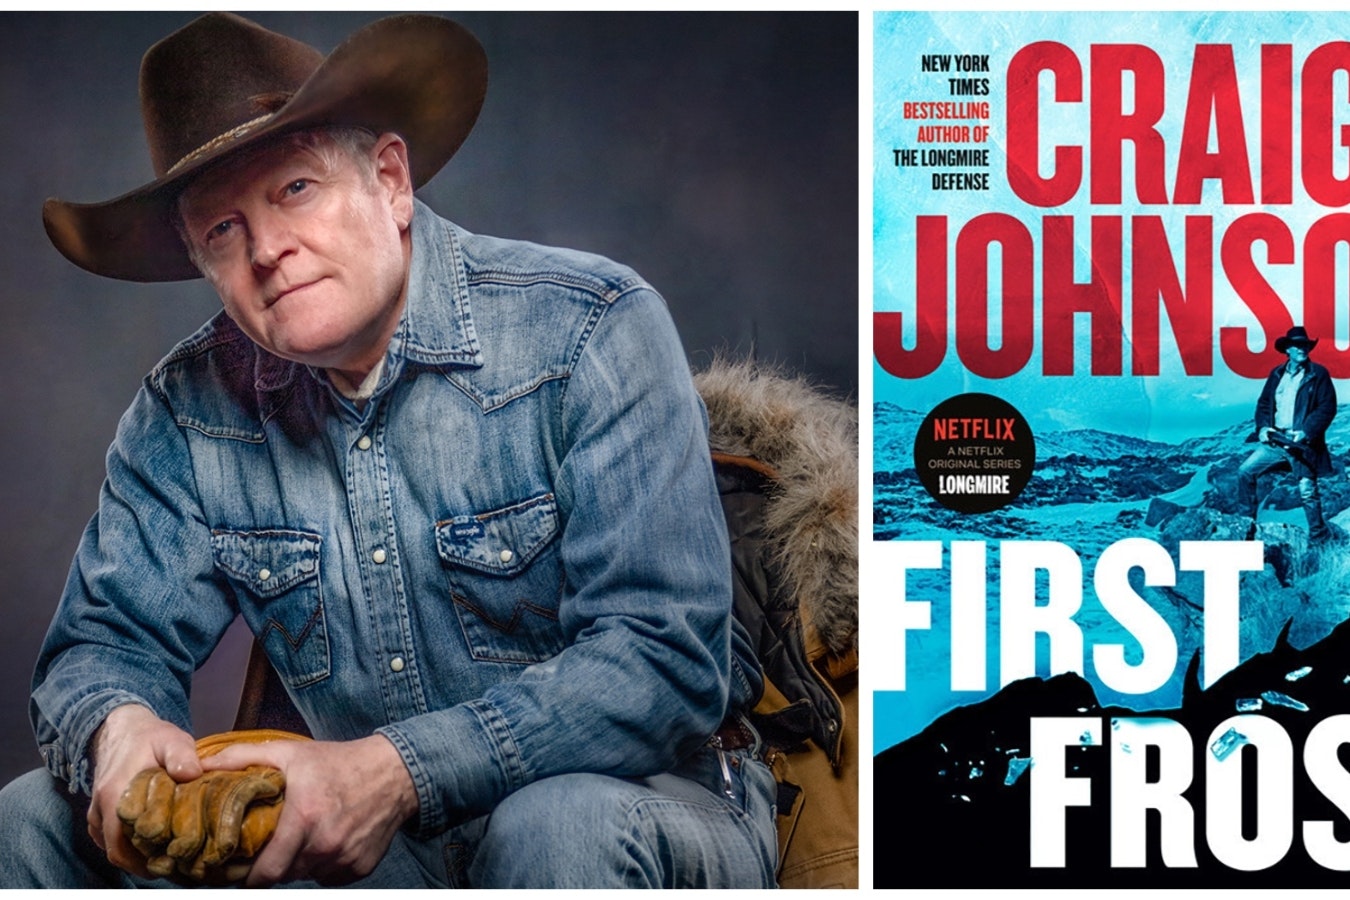 Wyoming bestselling author Craig Johnson is releasing the latest story in his Walt Longmire saga, "First Frost," in May.